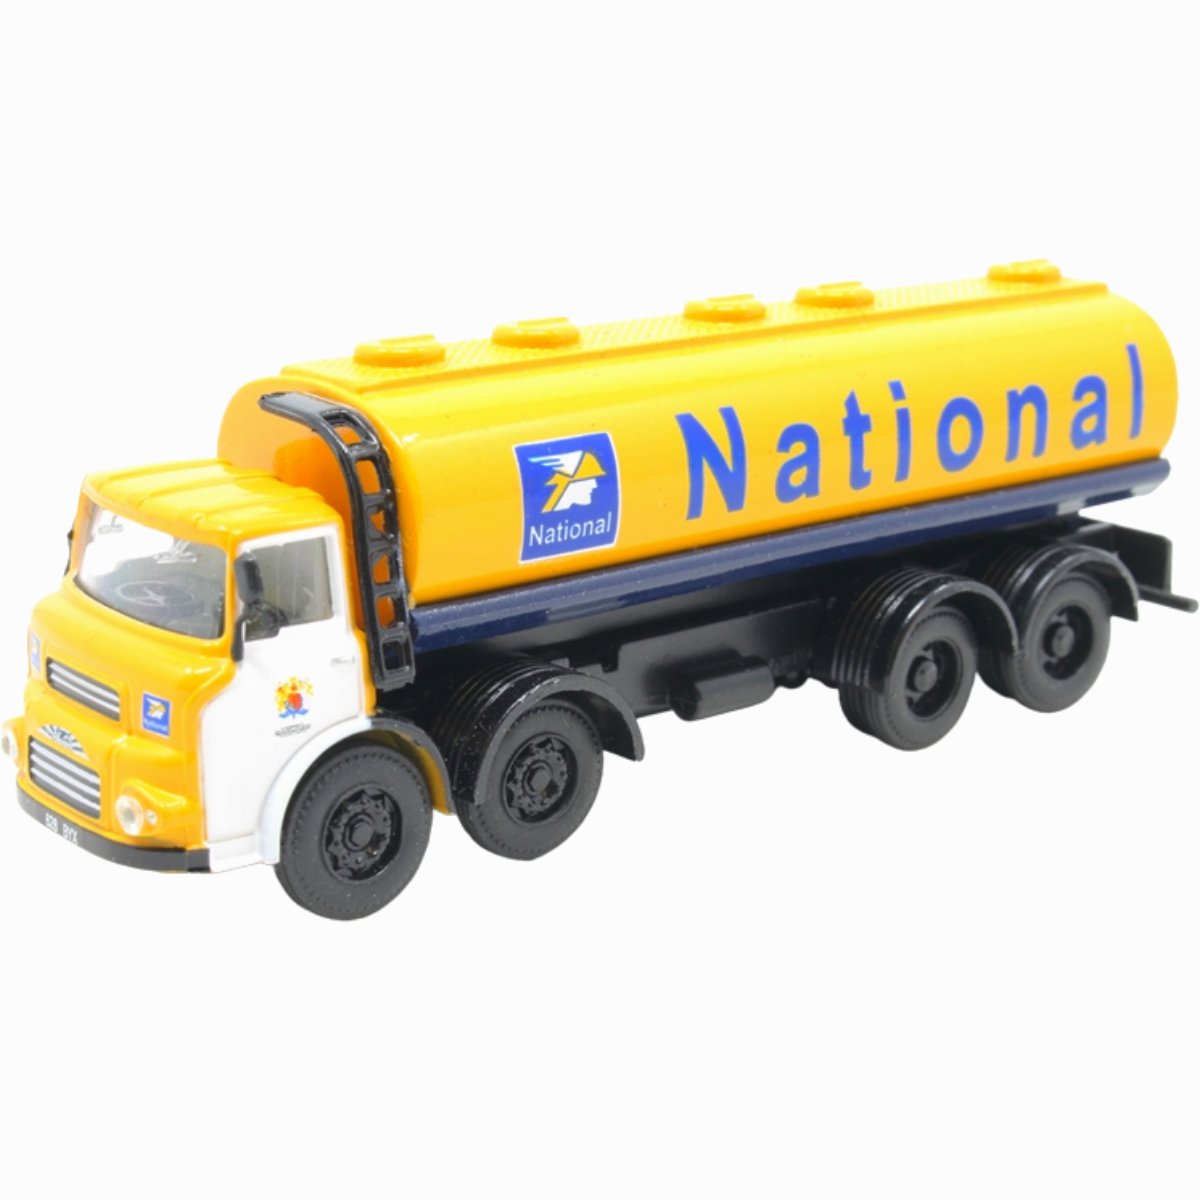 BT Models DB08 Albion Reiver Tanker National Benzole - 1:76 Scale - Phillips Hobbies